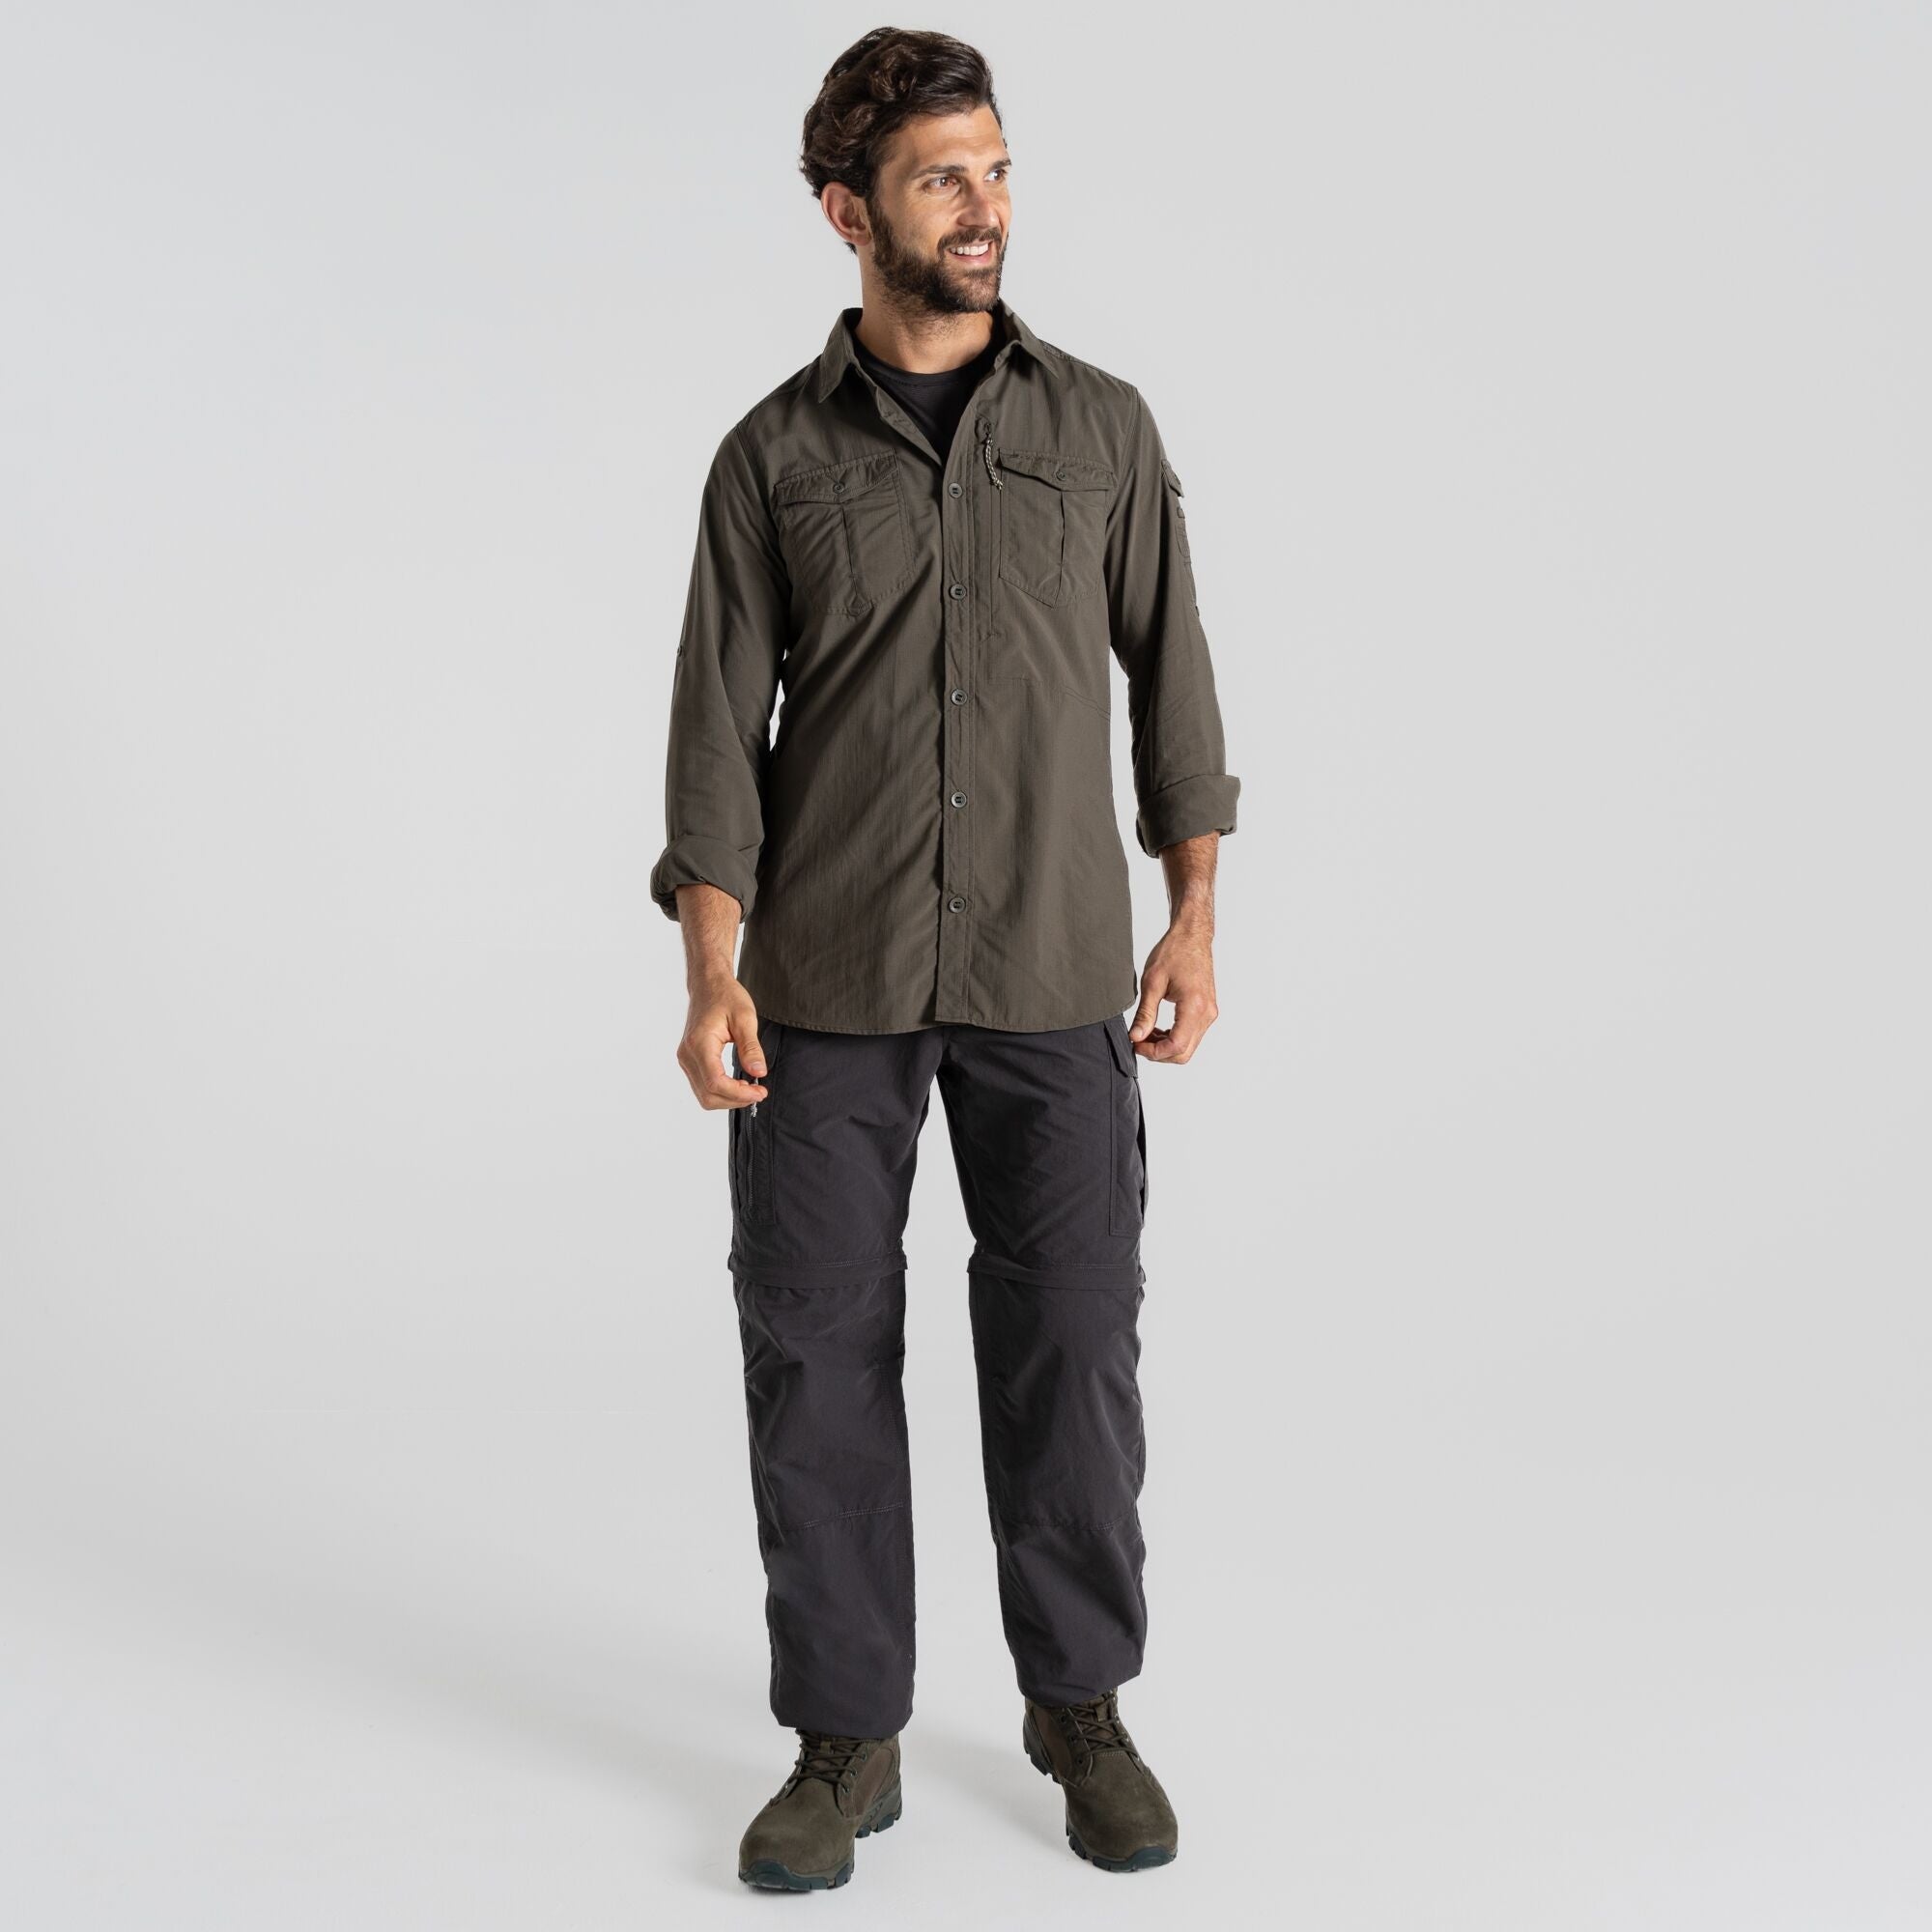 Men's Insect Shield® Adventure III Long Sleeved Shirt | Woodland Green